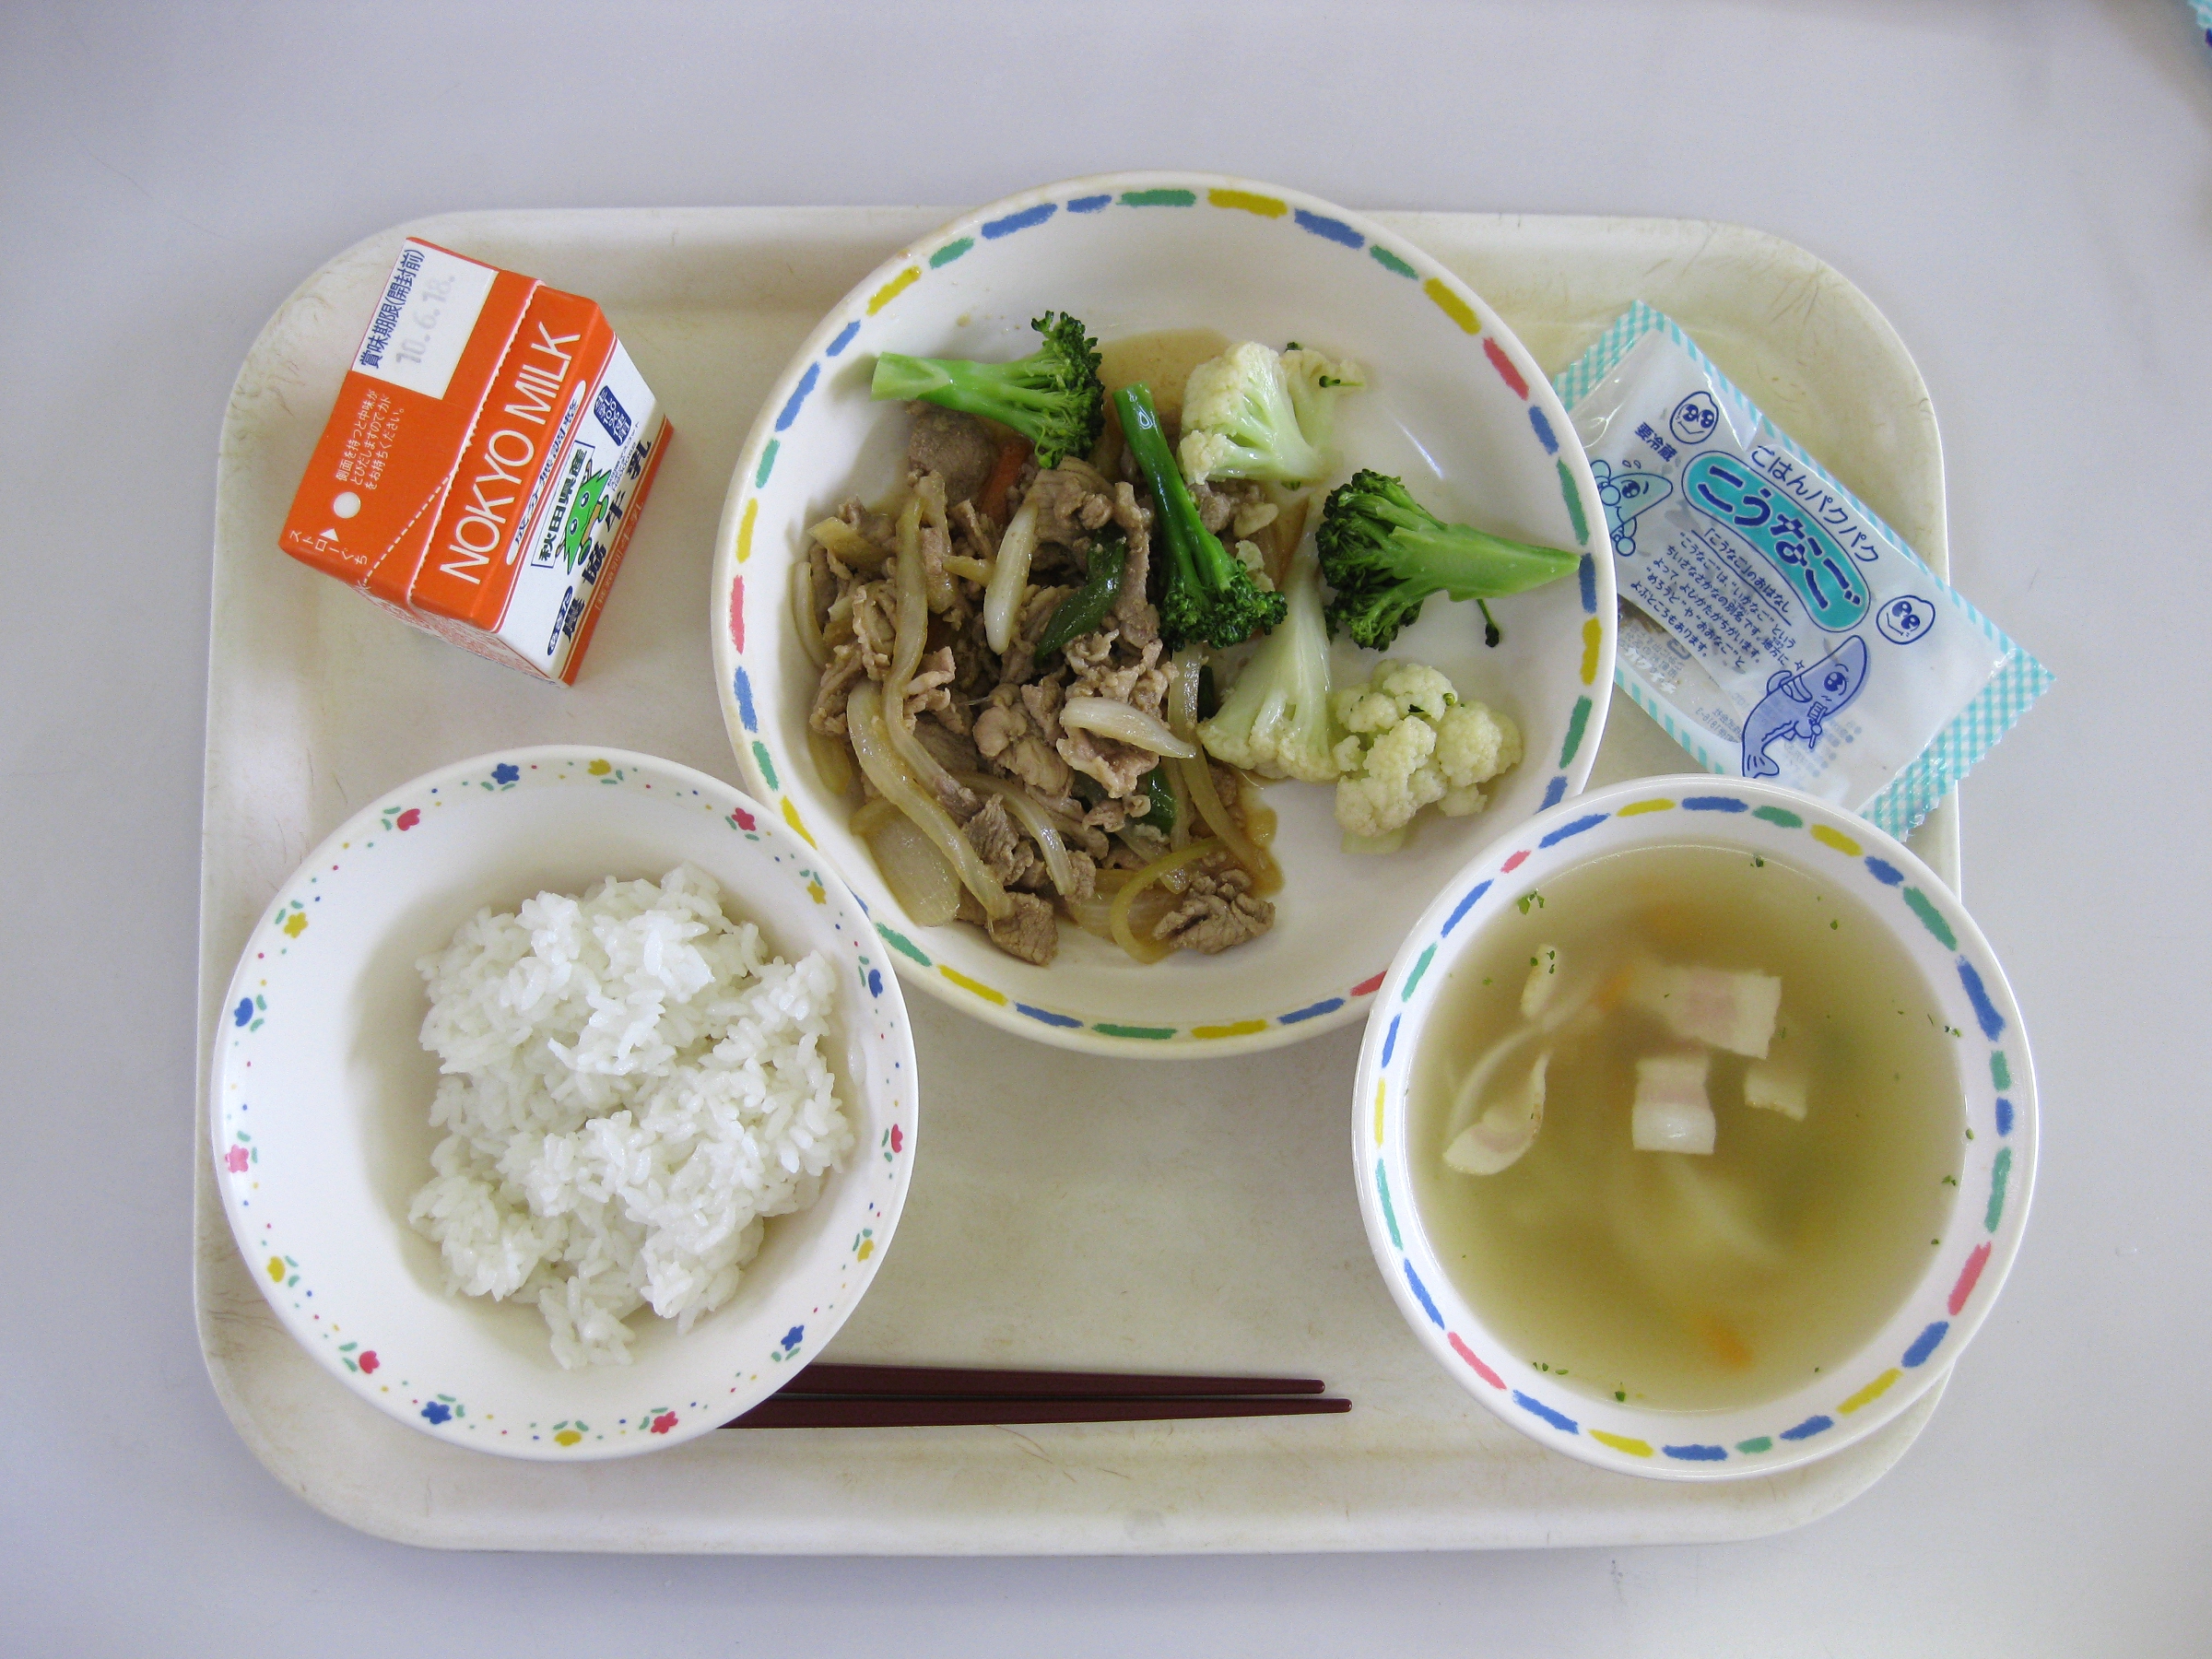 Typical Japanese lunch